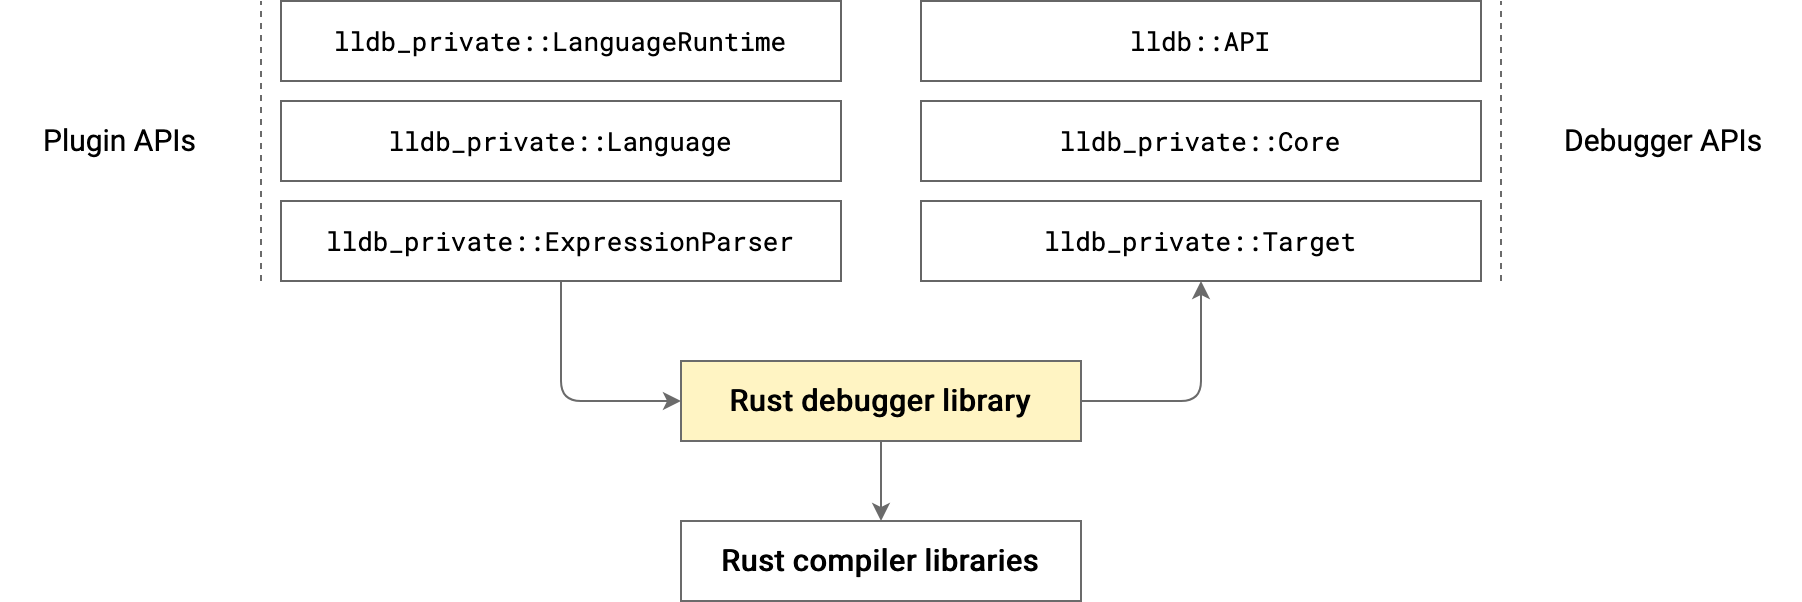 A possible structure of the debugger library